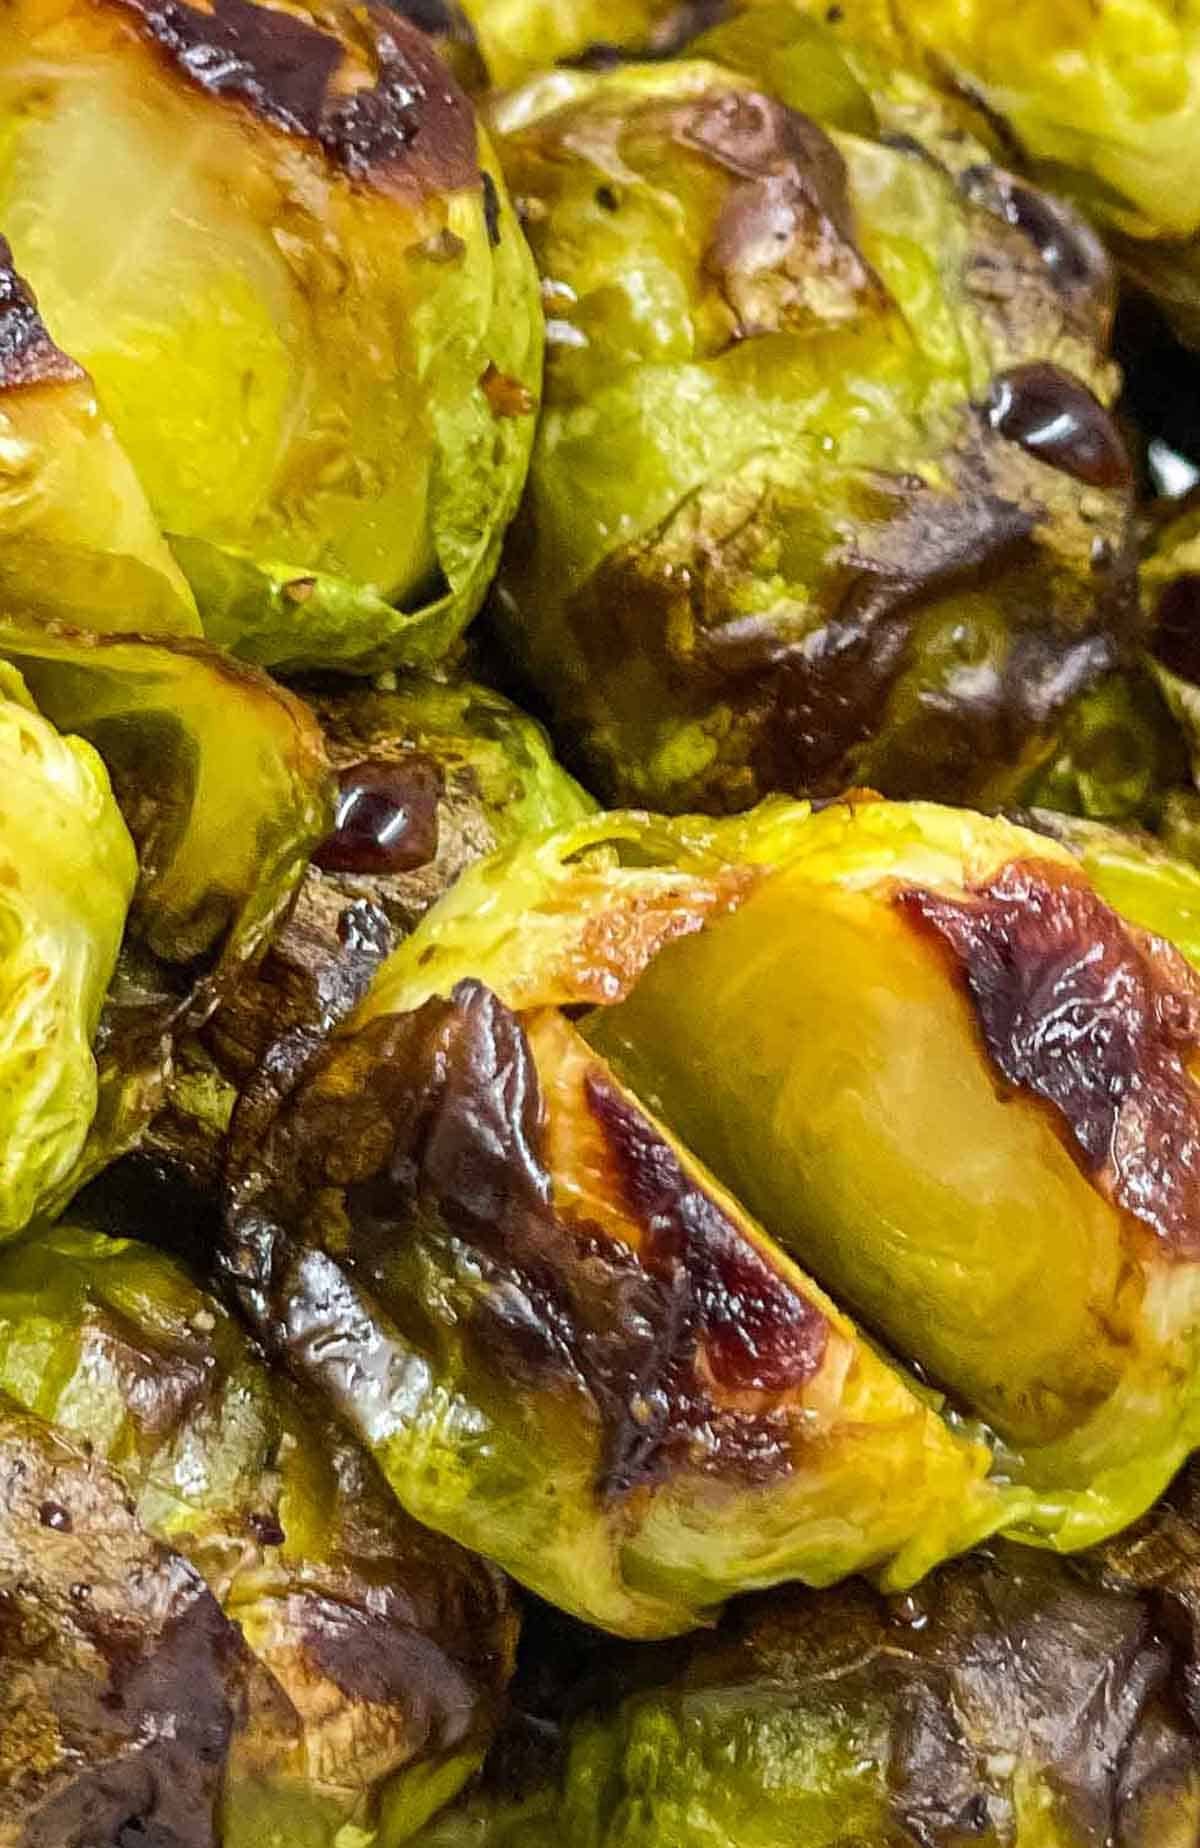 Easy Balsamic Roasted Brussels Sprouts Recipe